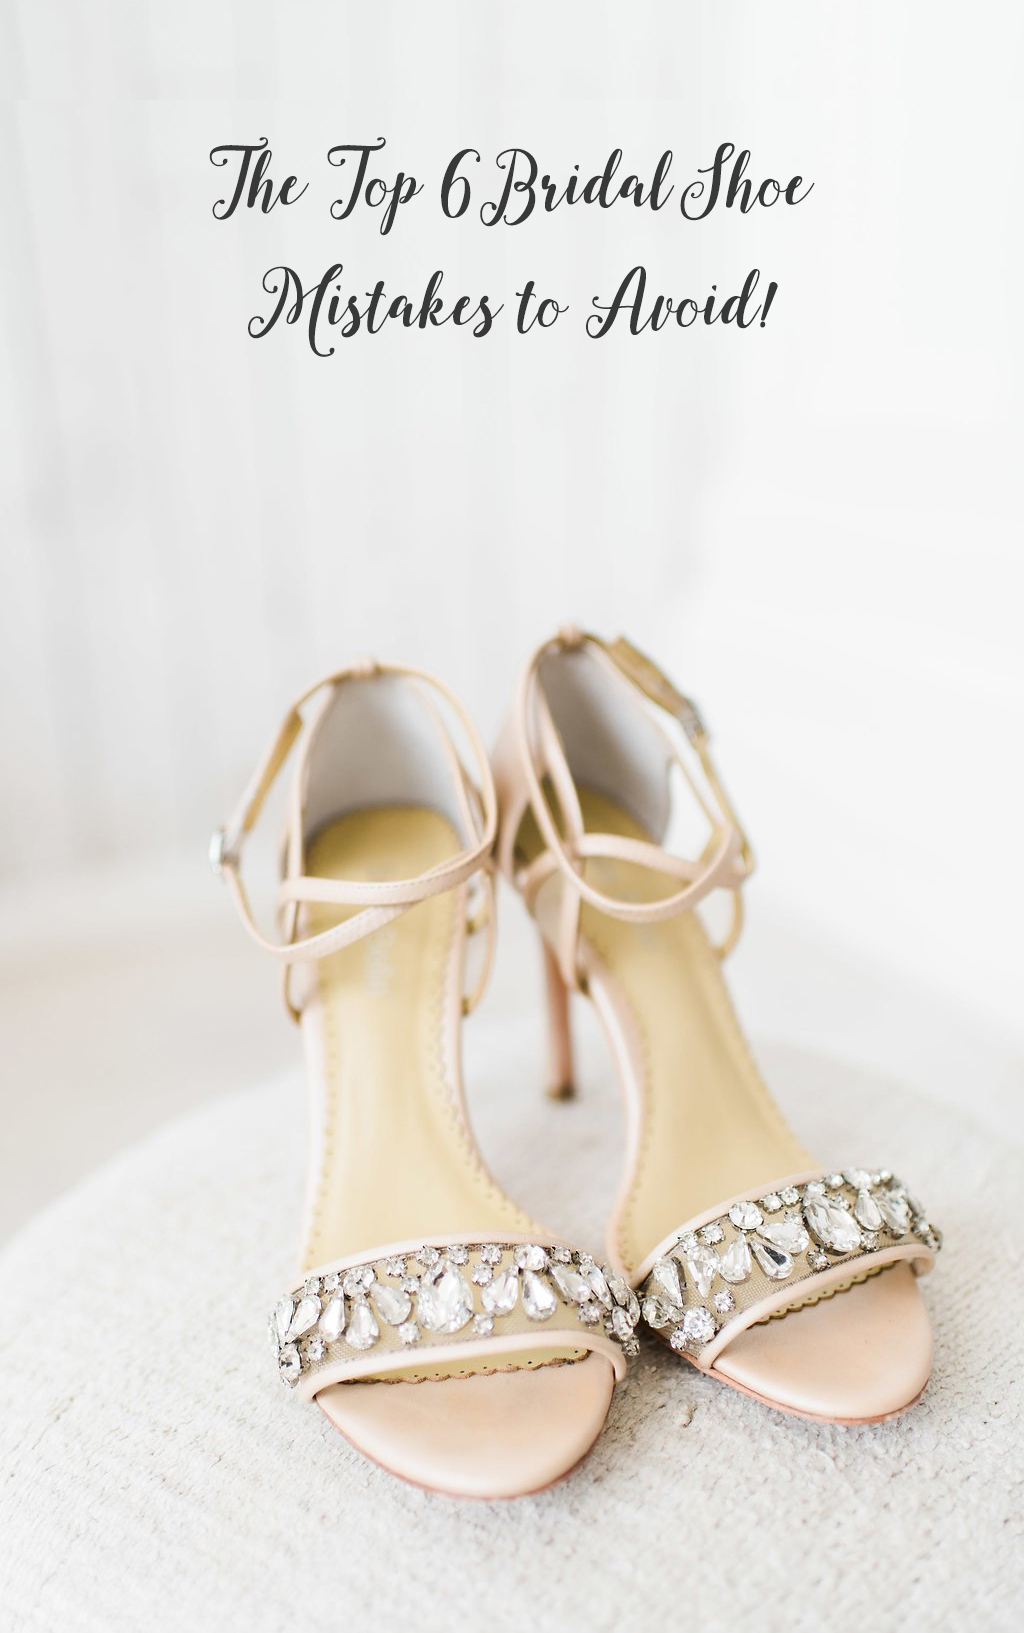 Top 6 Bridal Shoes Mistakes to Avoid